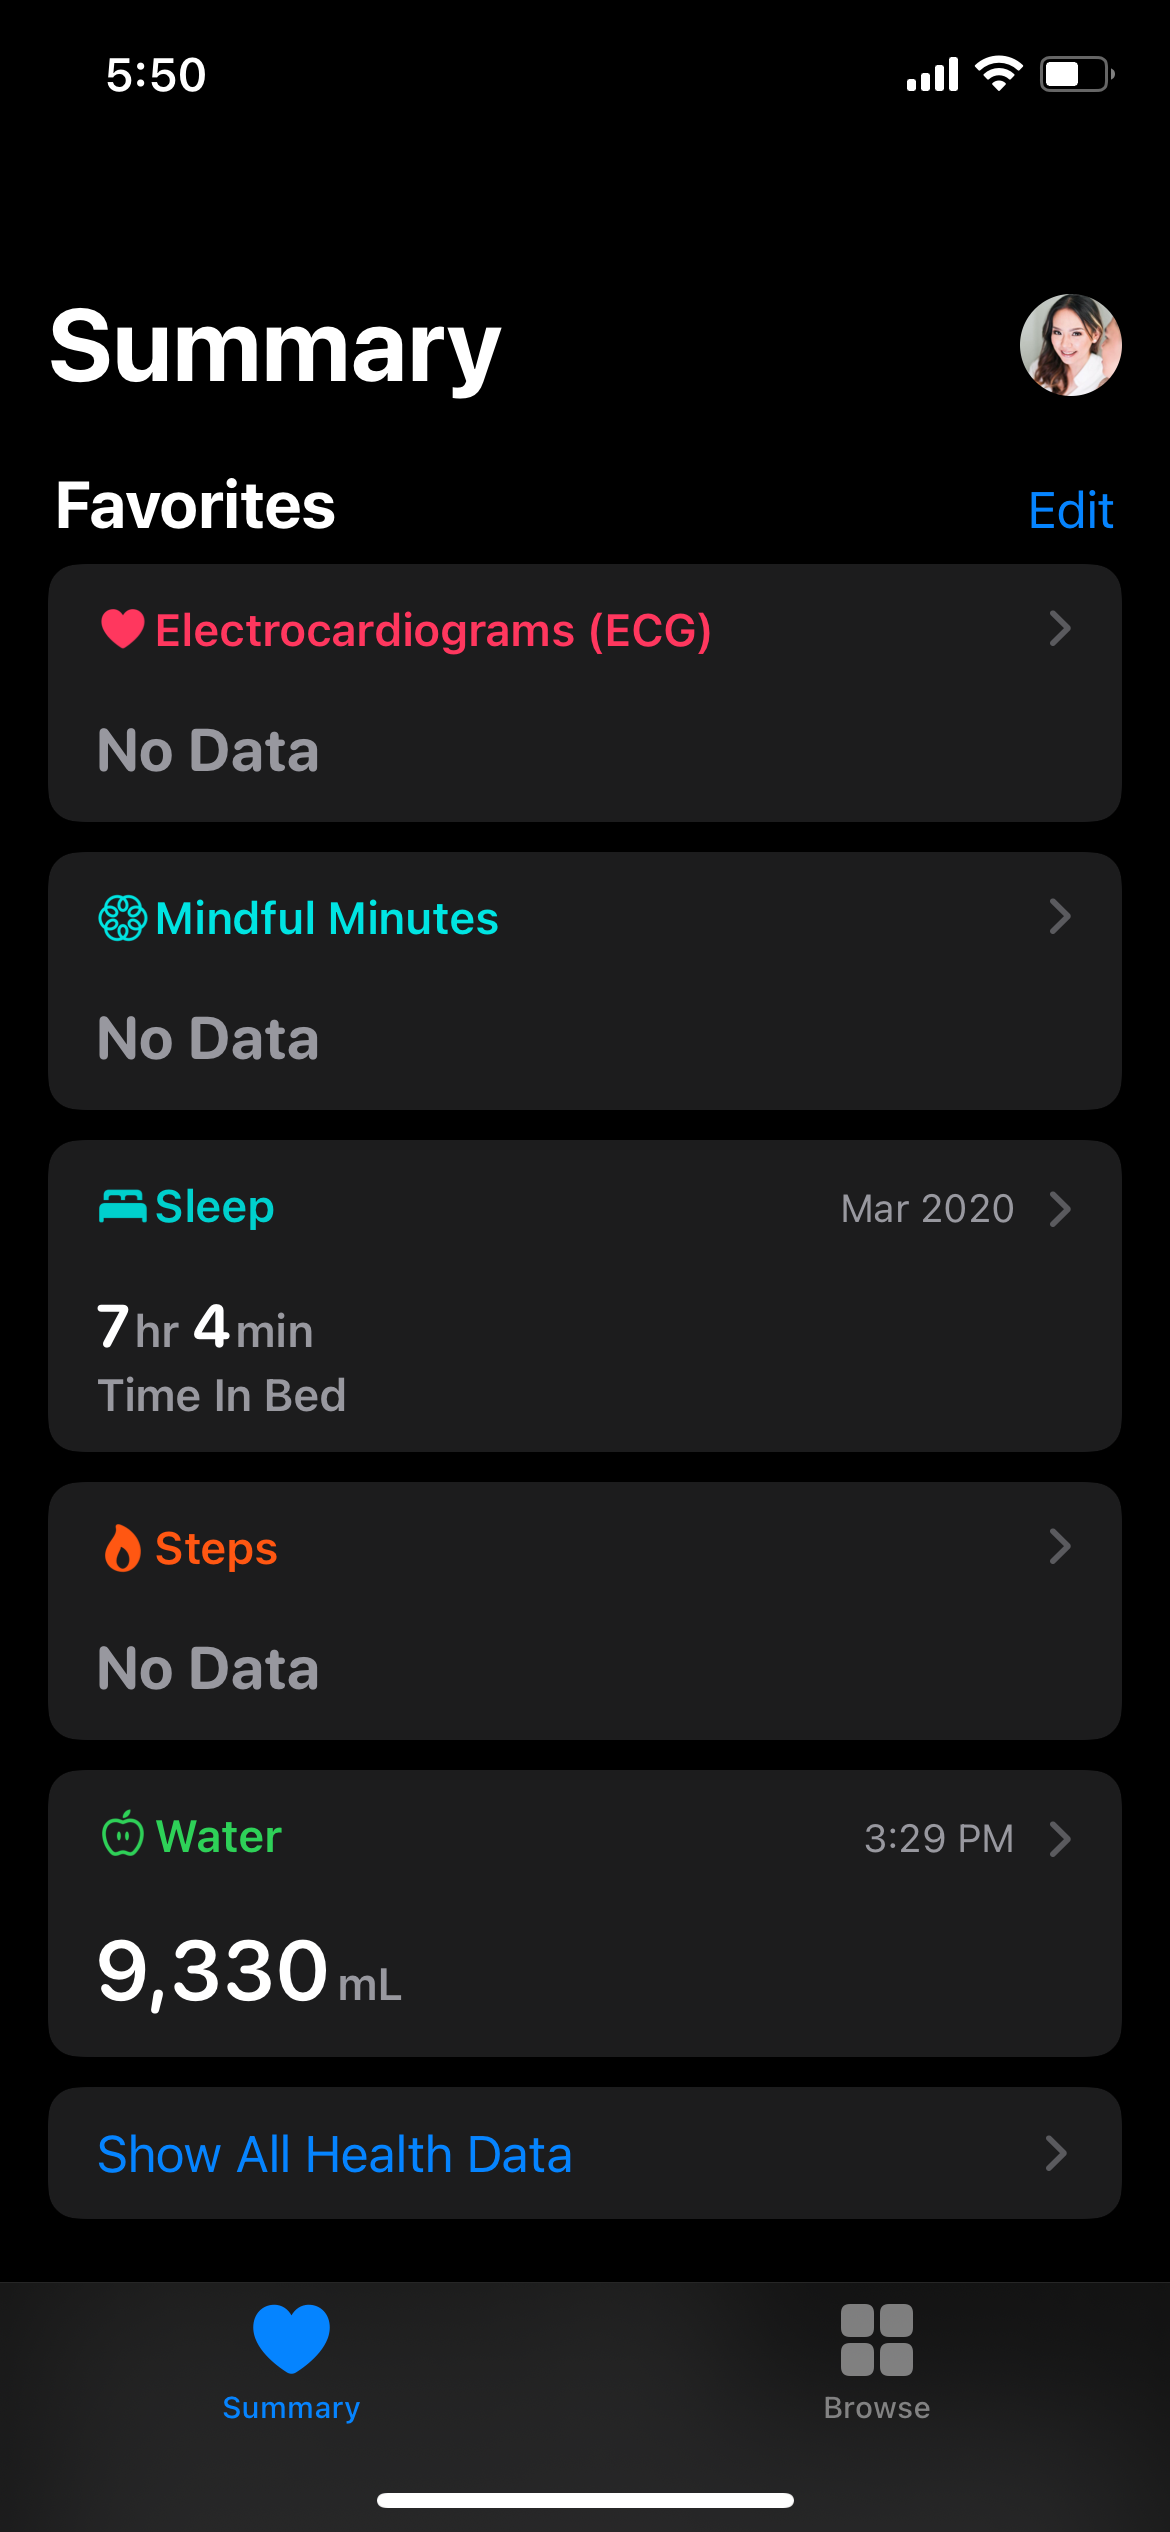 Health App Summary with Water Data